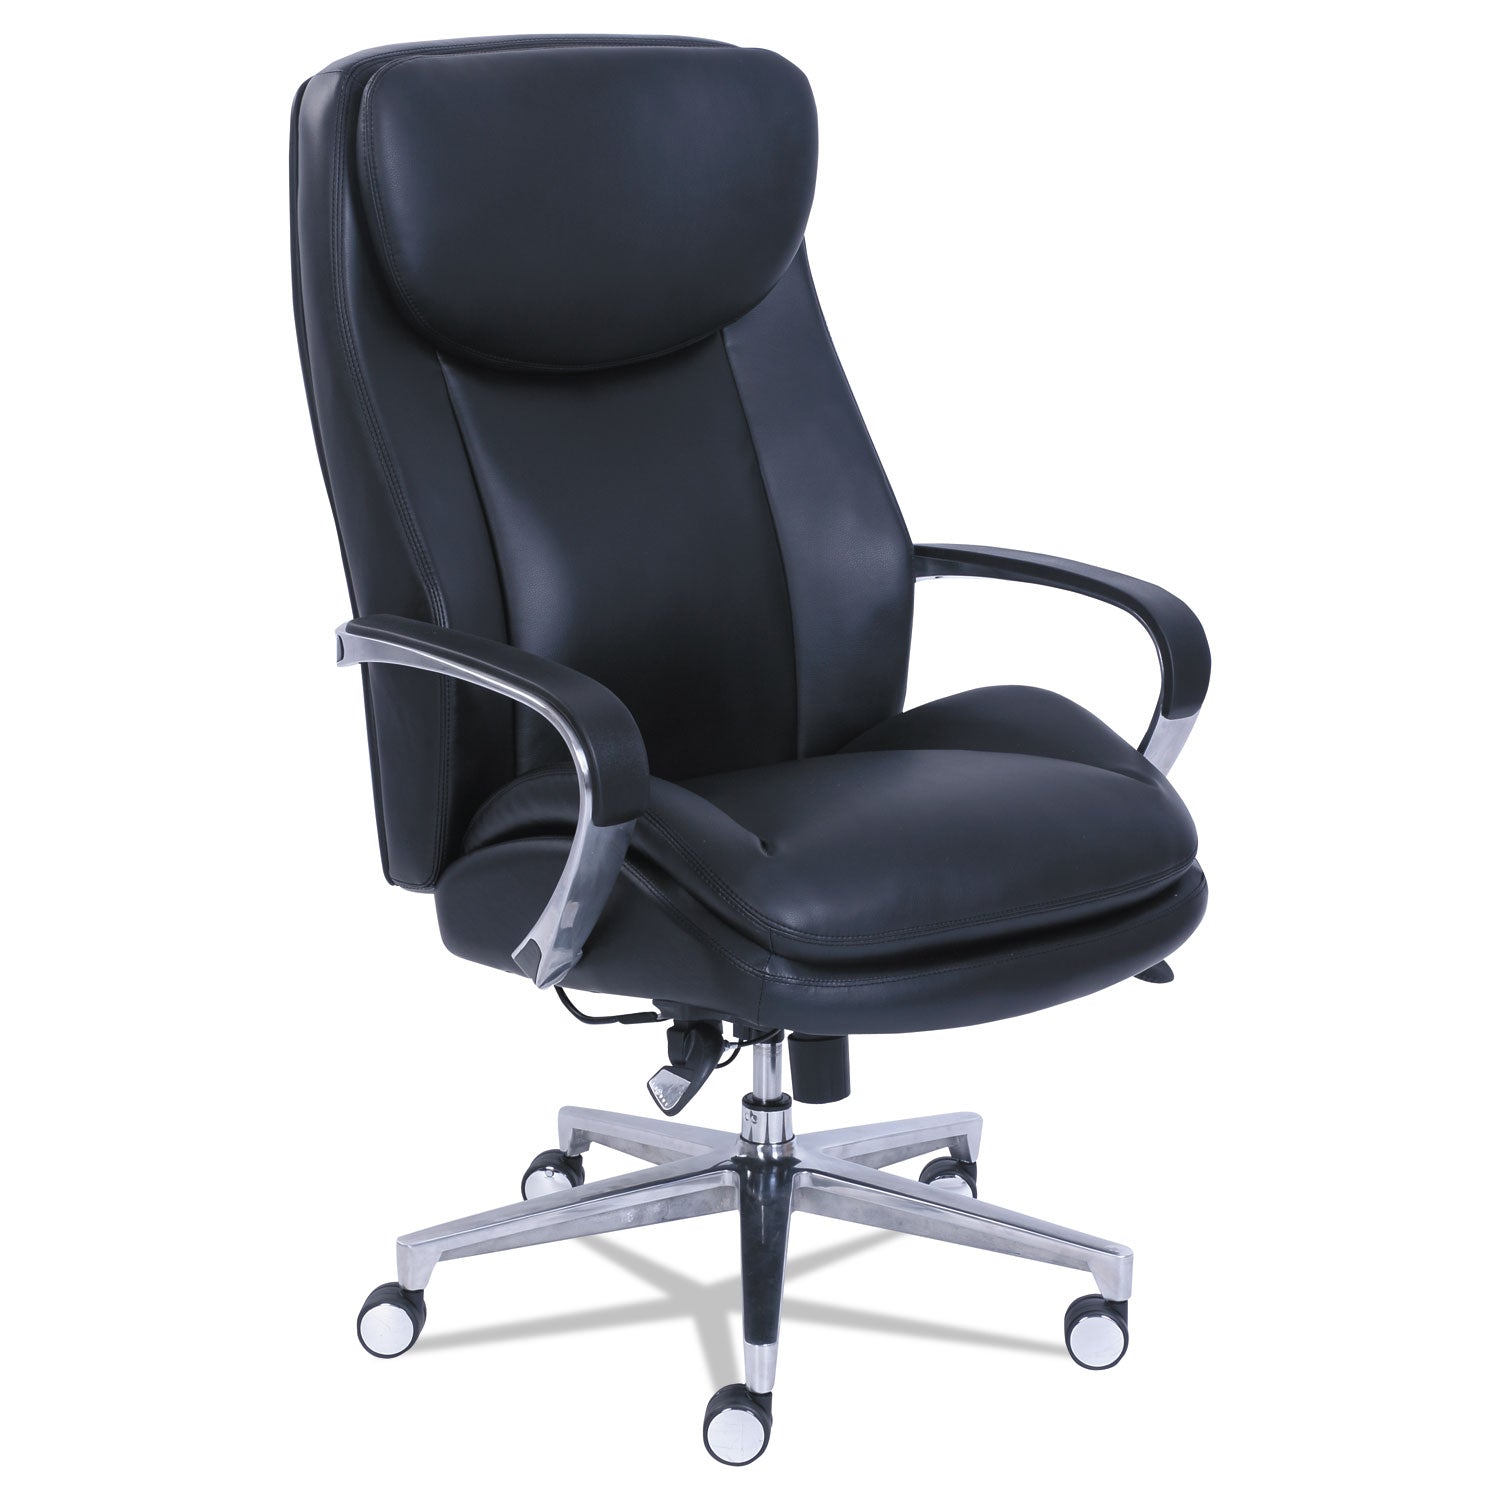 commercial-2000-big-tall-executive-chair-lumbar-supports-400-lb-2025-to-2325-seat-height-black-seat-back-silver-base_lzb48956 - 1